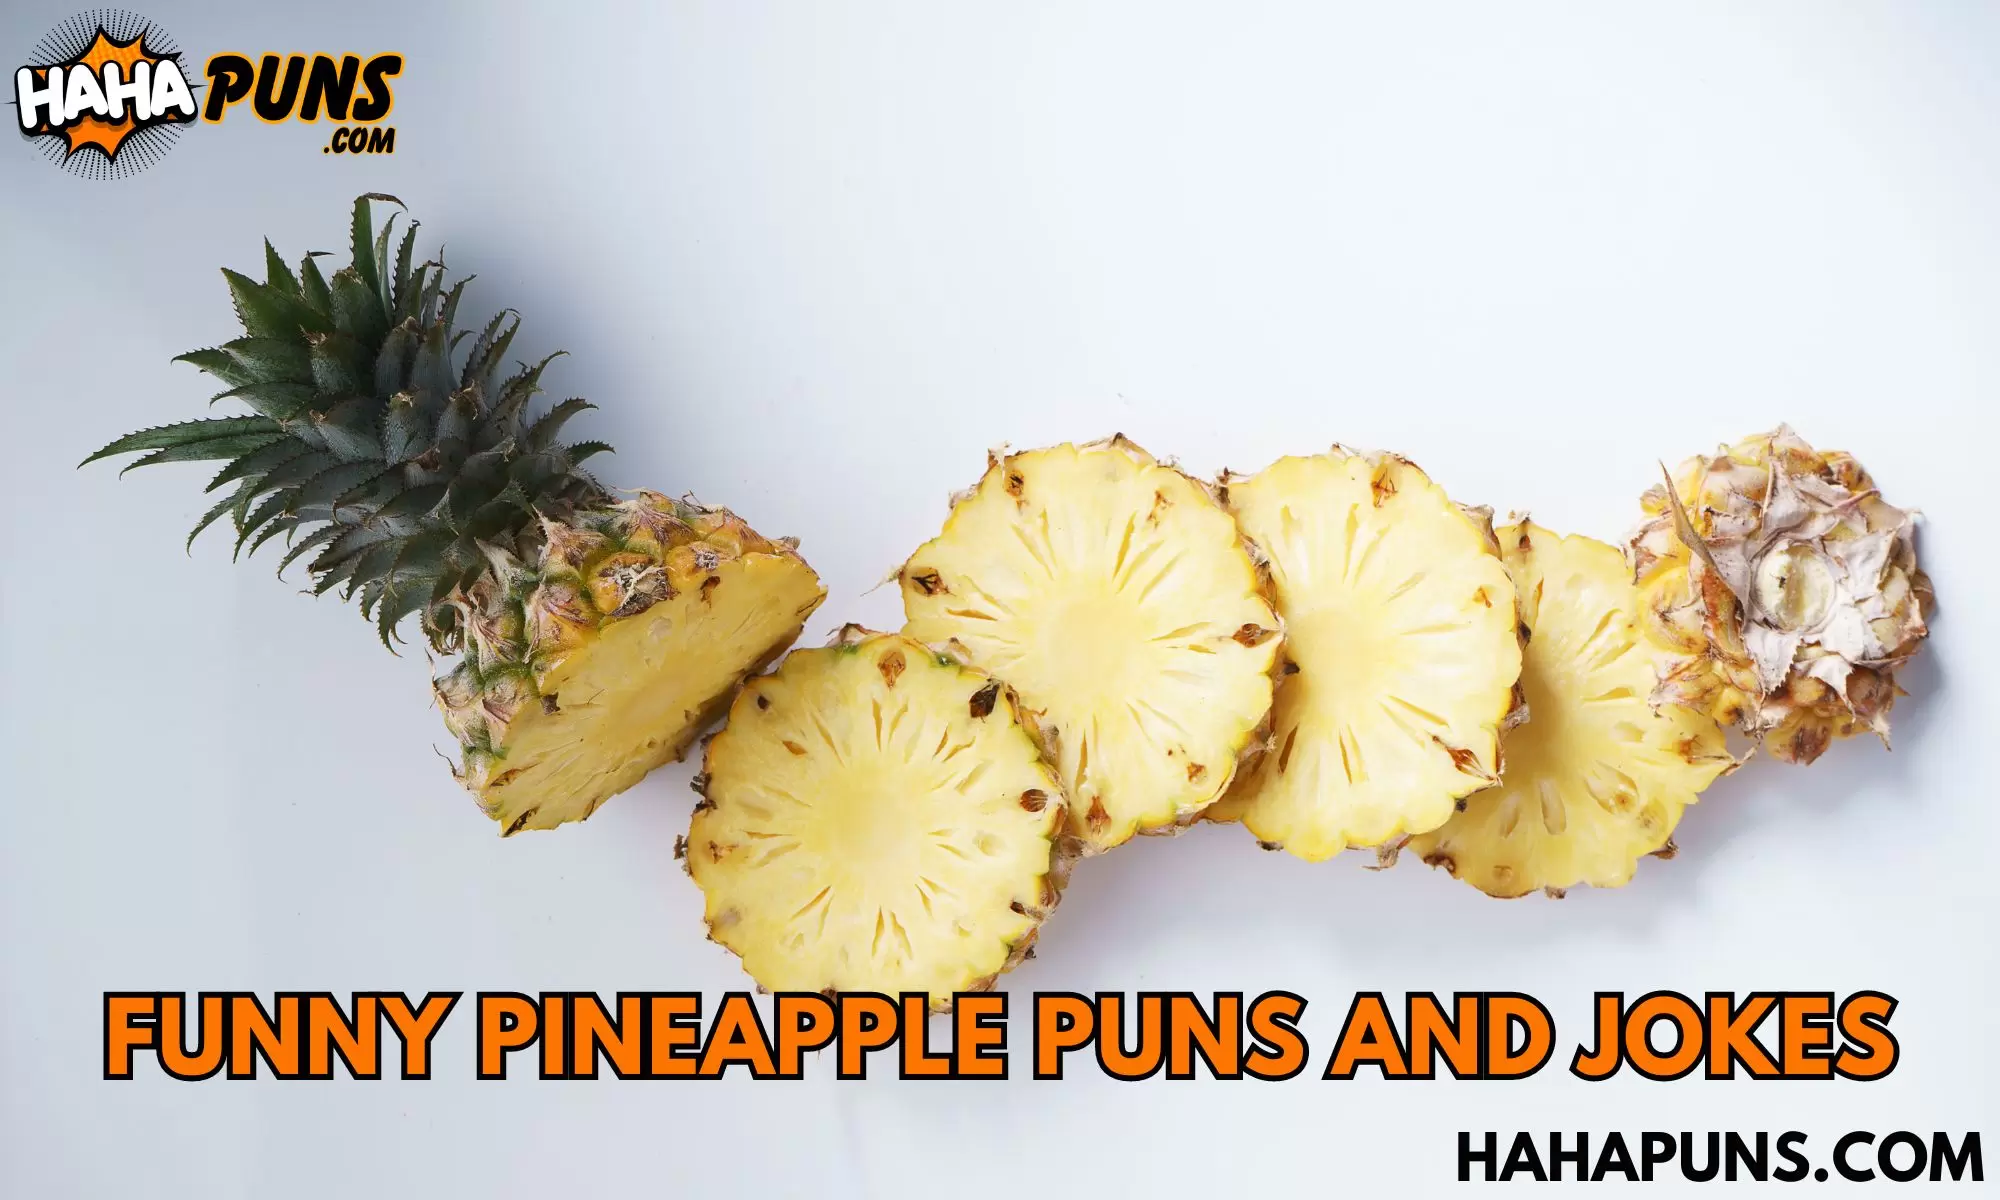 Funny Pineapple Puns And Jokes